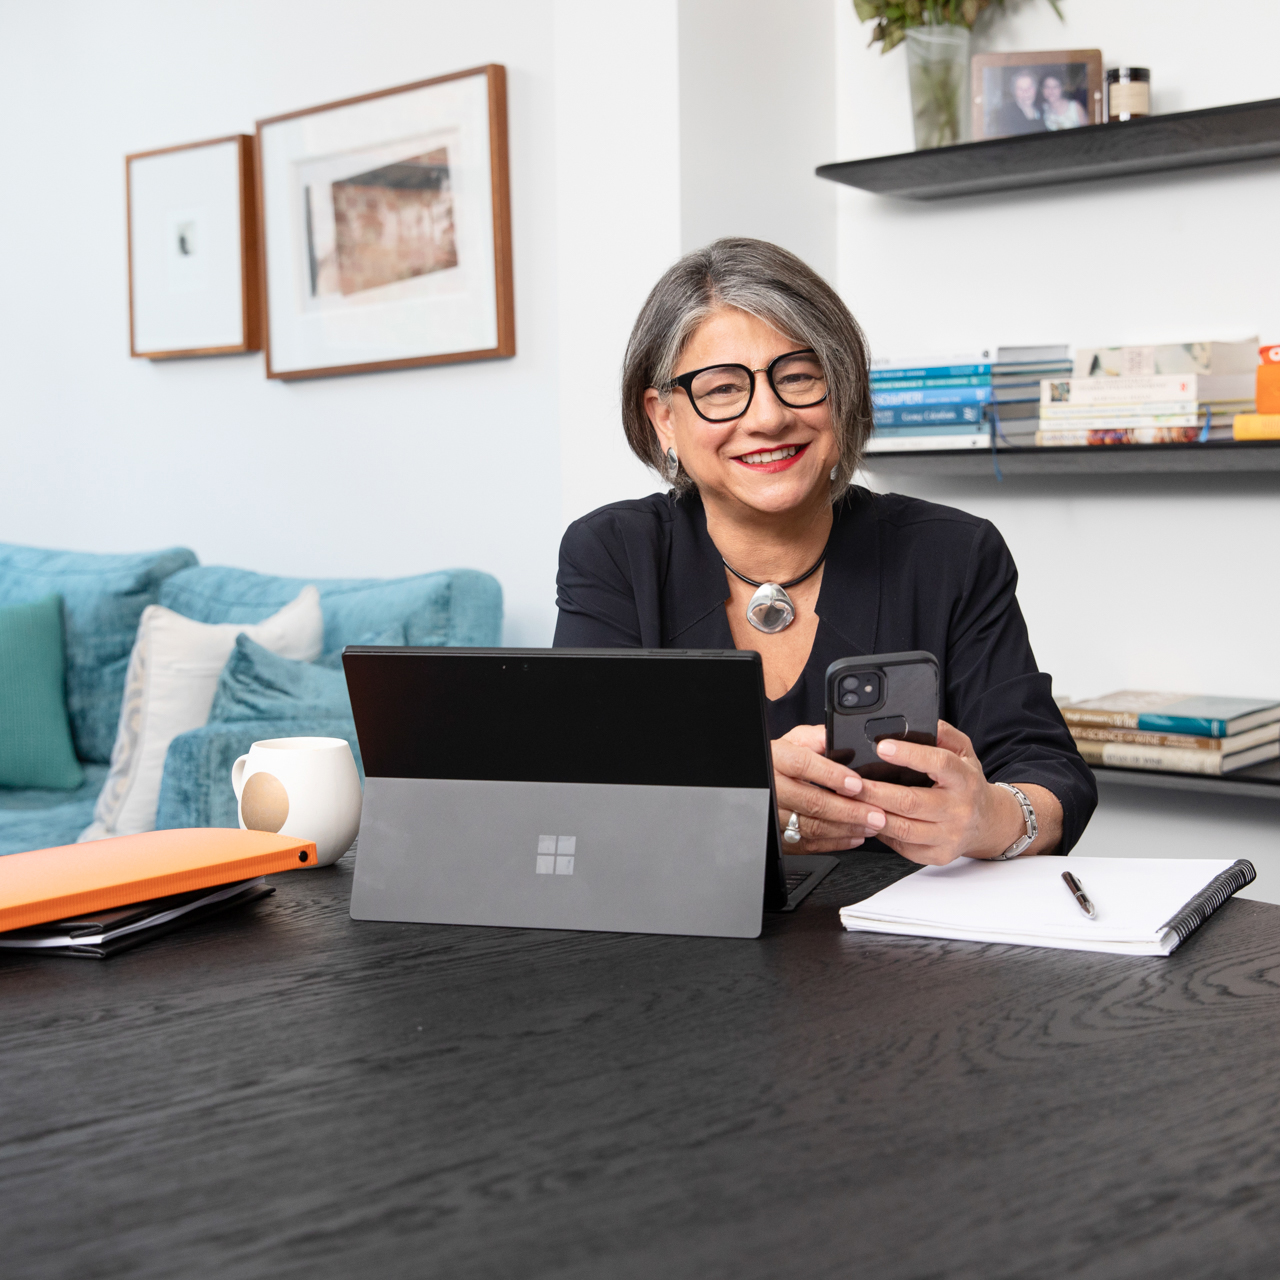 personal branding photo of a female business owner sitting at table with laptop and holding her mobile phone